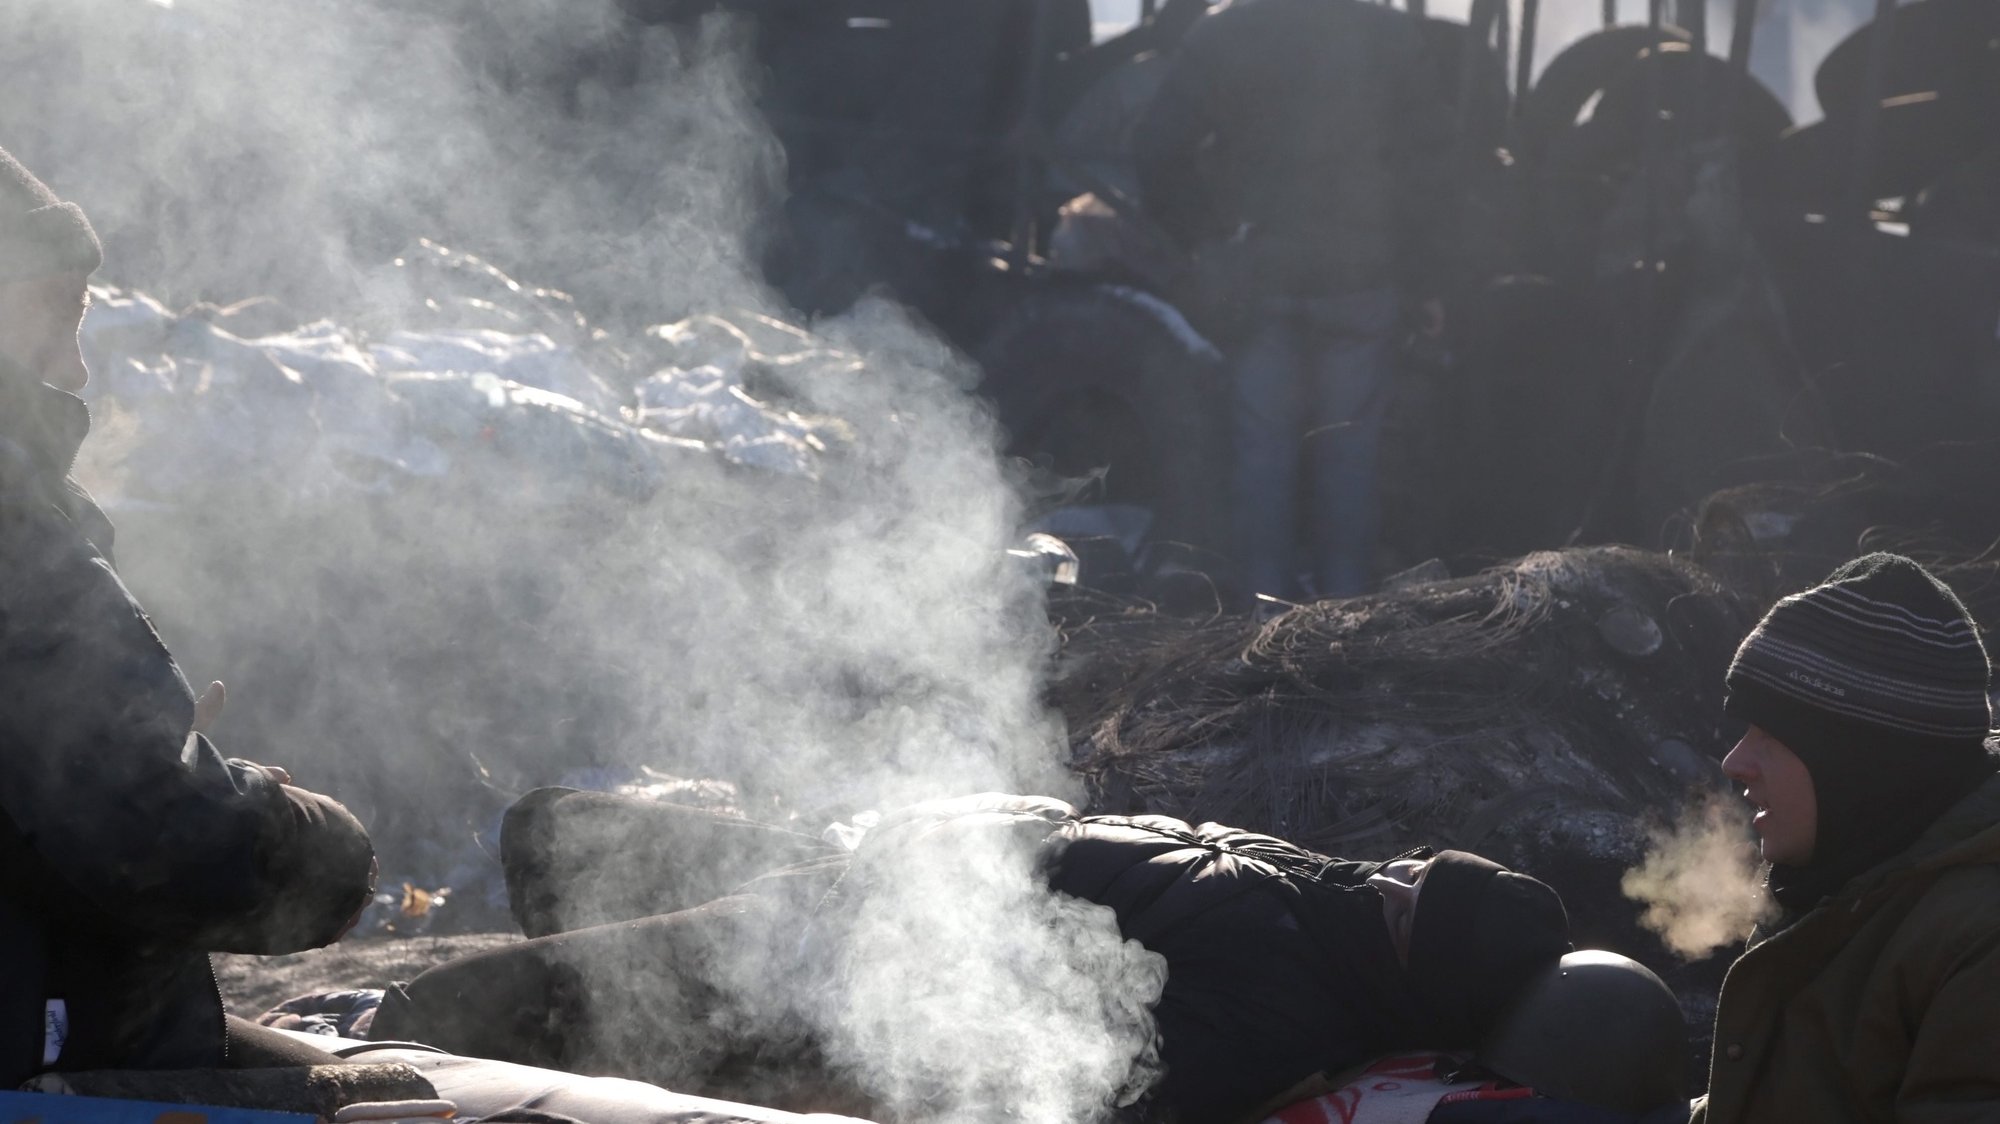 epa04054428 A protester takes a nap near a fire at a barricade during the continuing protests in Kiev, Ukraine, 04 February 2014. Violent street riots have been ongoing in Kiev and other cities in Ukrain since late November 2013, when President Viktor Yanukovych reneged on a trade agreement with EU and opted for closer ties with Moscow instead. Protesters in Ukraine continued to occupy government buildings on 30 January, hours after parliament approved an amnesty for the hundreds of people jailed during weeks of demonstrations on the condition that the buildings are vacated and the protests end.  EPA/MAXIM SHIPENKOV